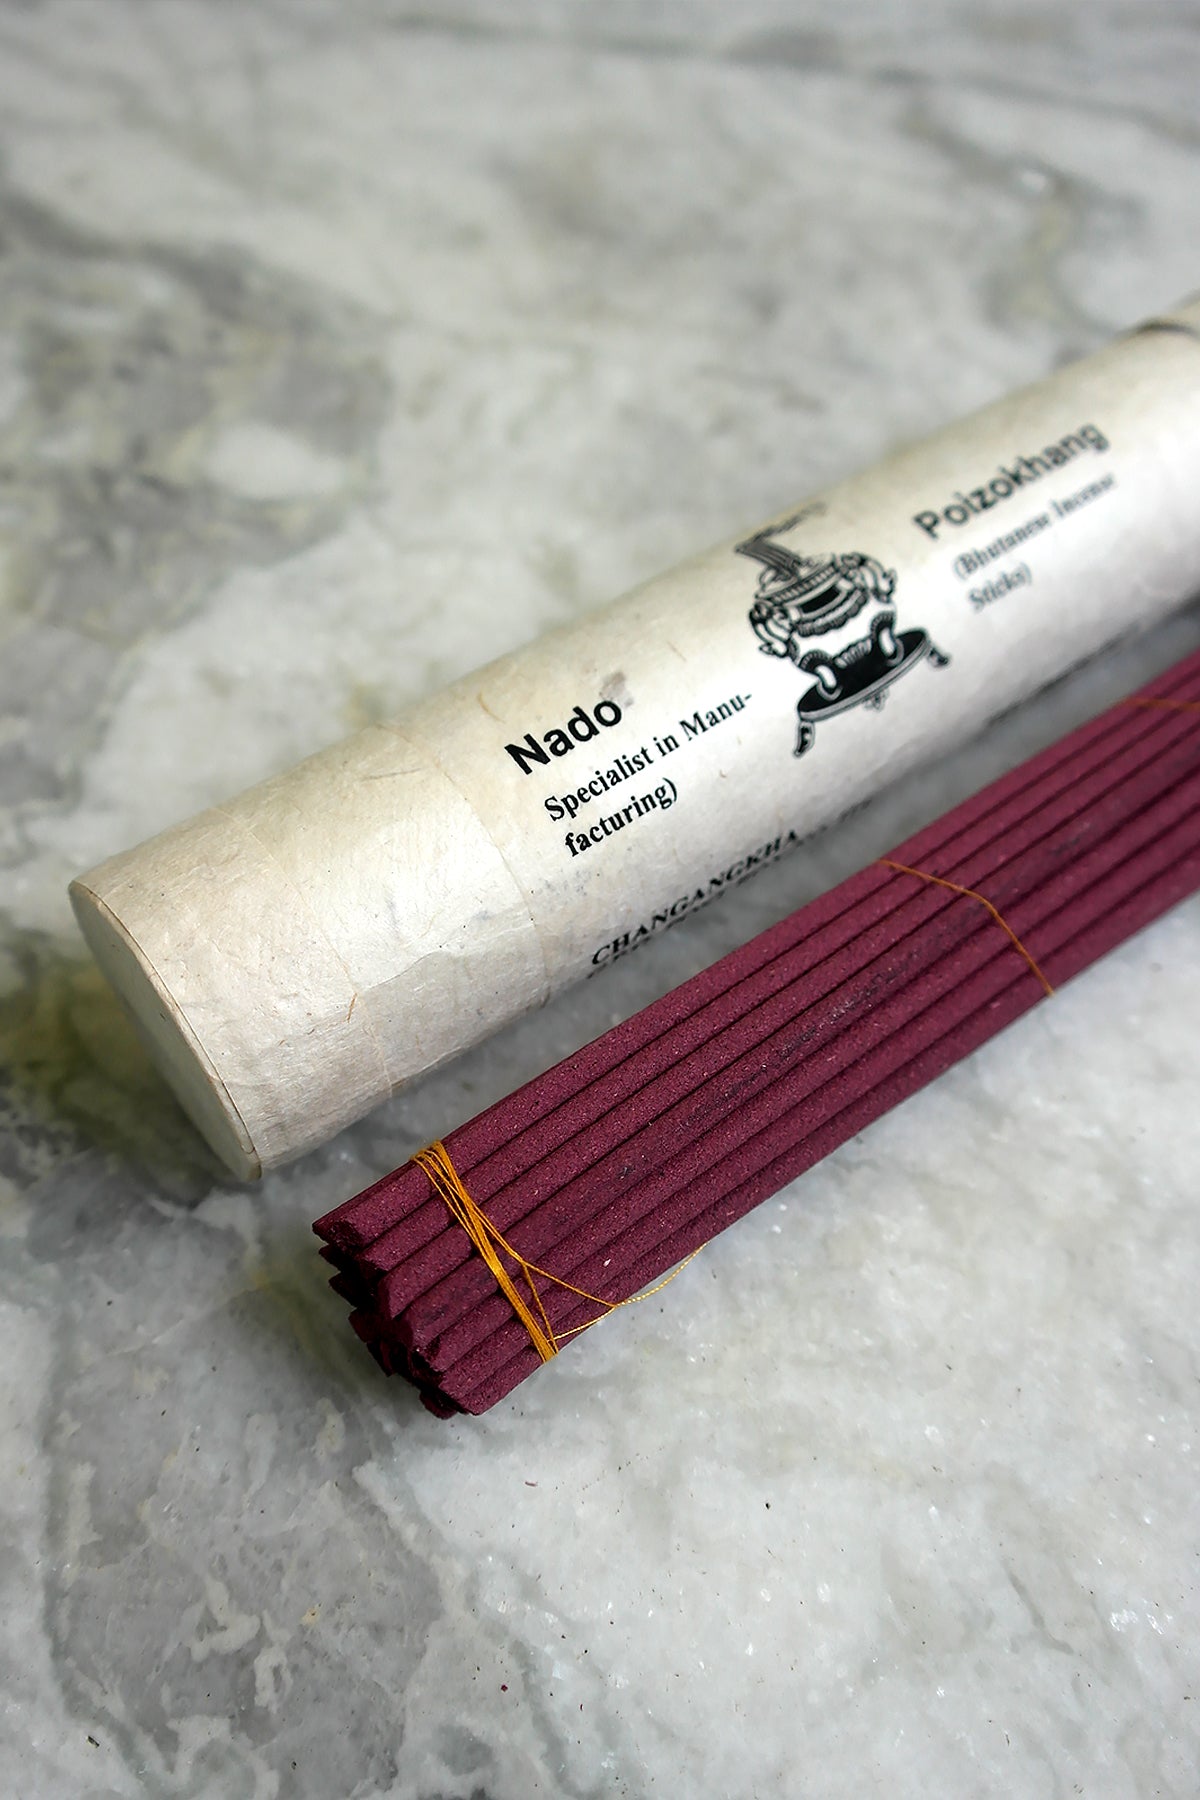 Nado Poizokhang Traditional Bhutanese Incense Stick in paper pack